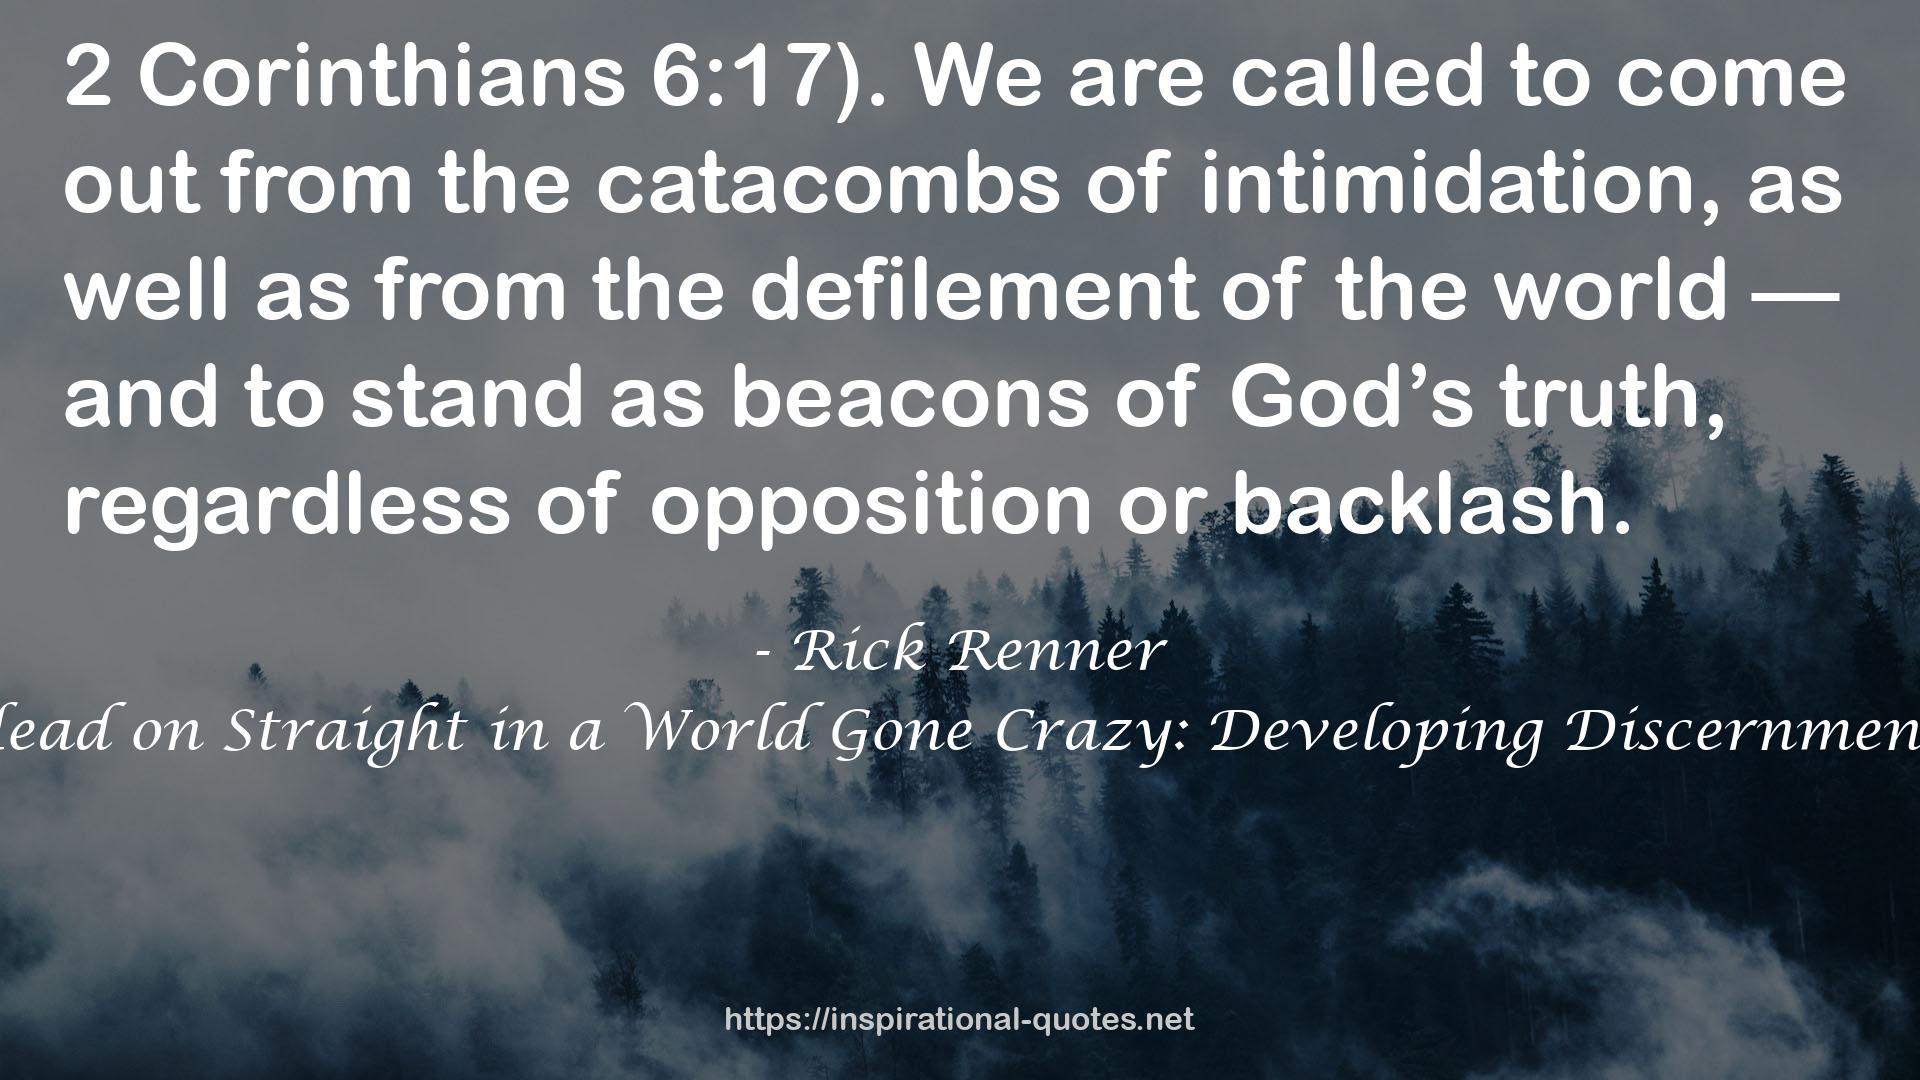 Rick Renner QUOTES